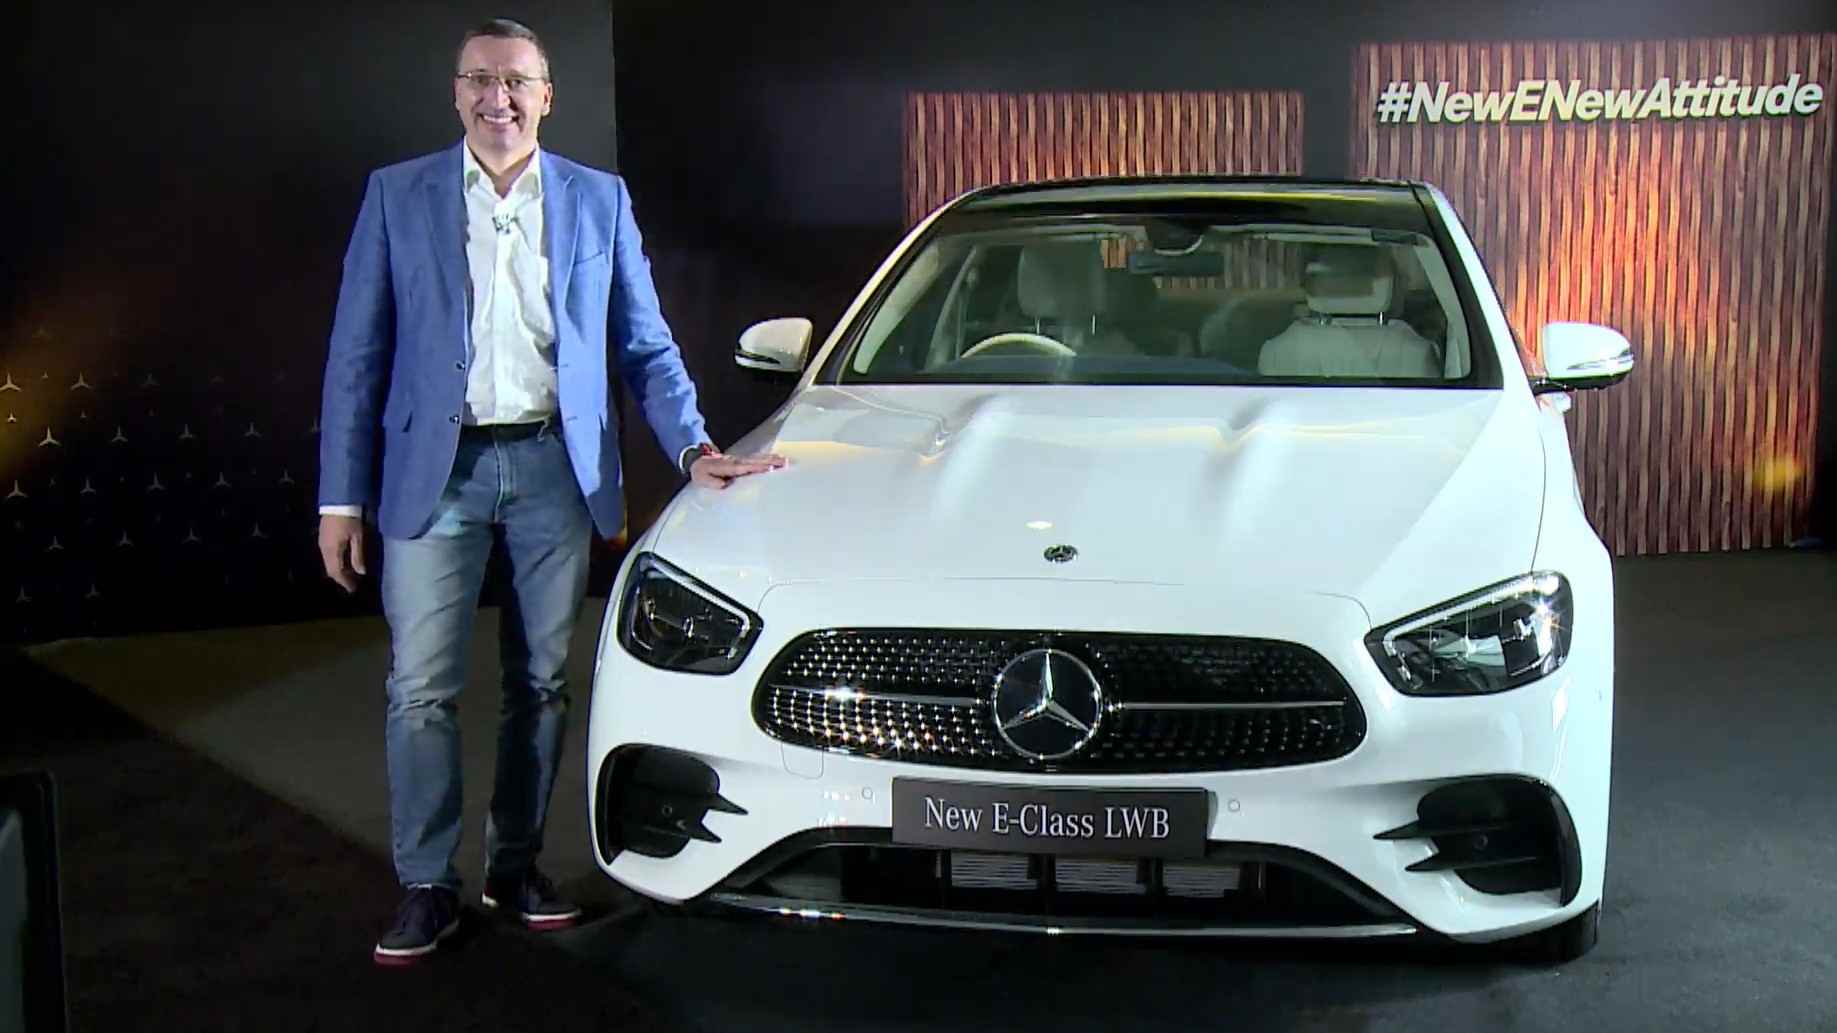 Mercedes-Benz E-Class facelift launched in India, prices range from Rs 63.60-80.90 lakh- Technology News, Gadgetclock